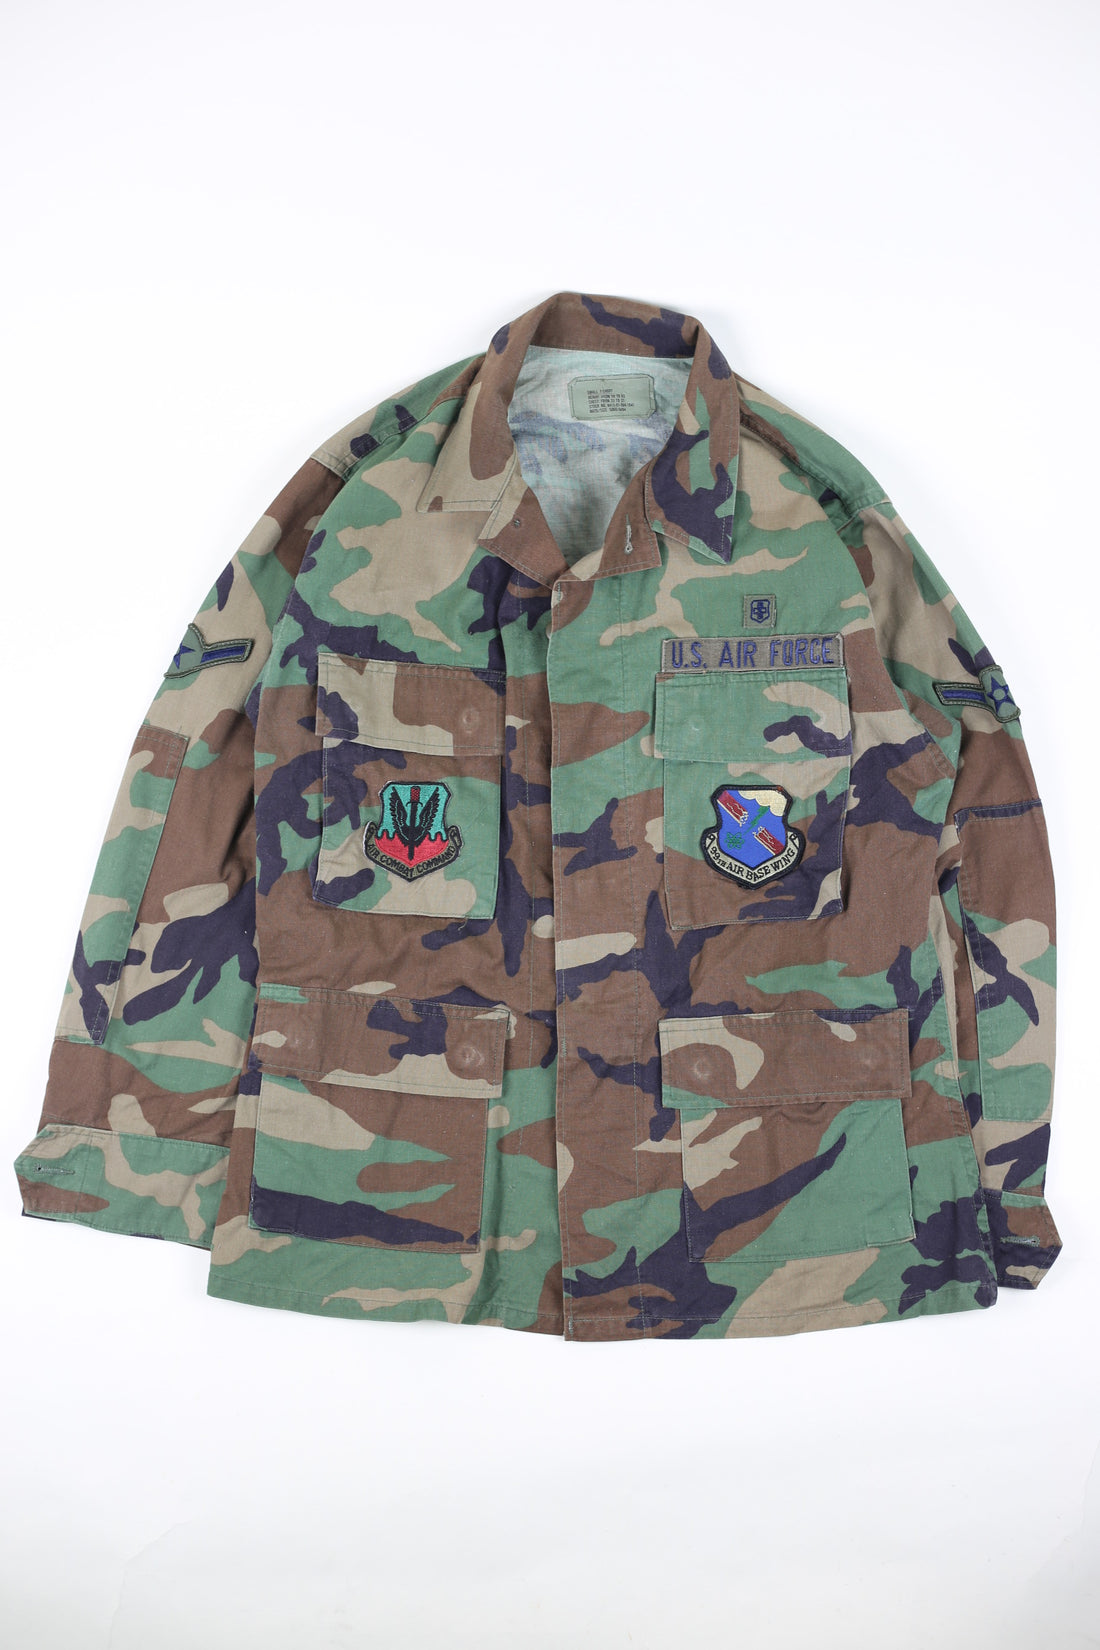 BDU WOODLAND Us Air Force camouflage jacket - S -